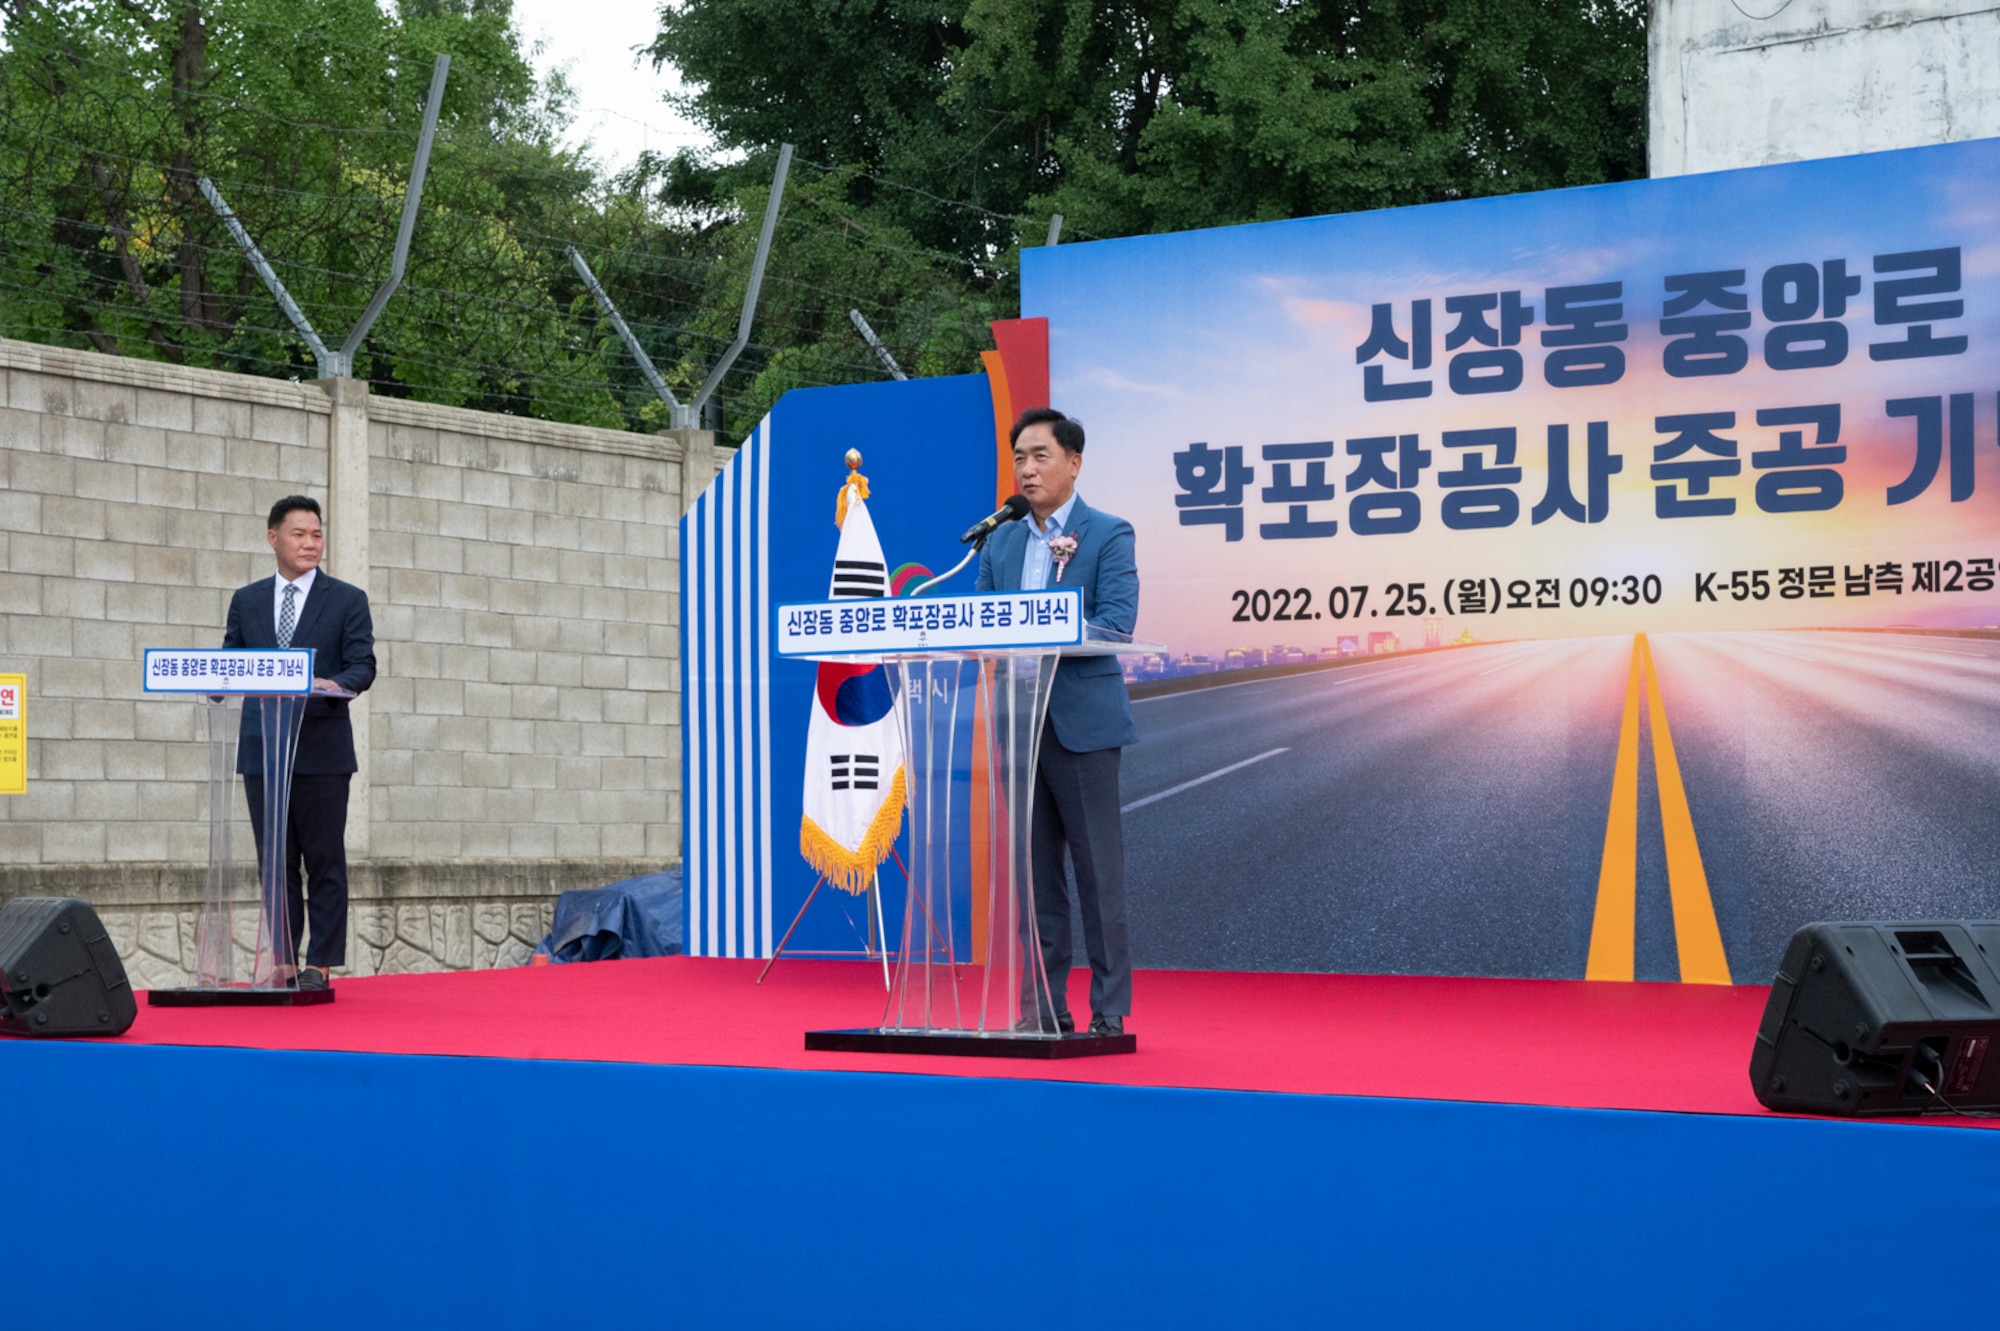 Jang Seon Jung, Pyeongtaek mayor, speaks to the Songtan community during a ribbon cutting ceremony celebrating the newly constructed roundabout outside of Osan Air Base, Republic of Korea, July 25, 2022.